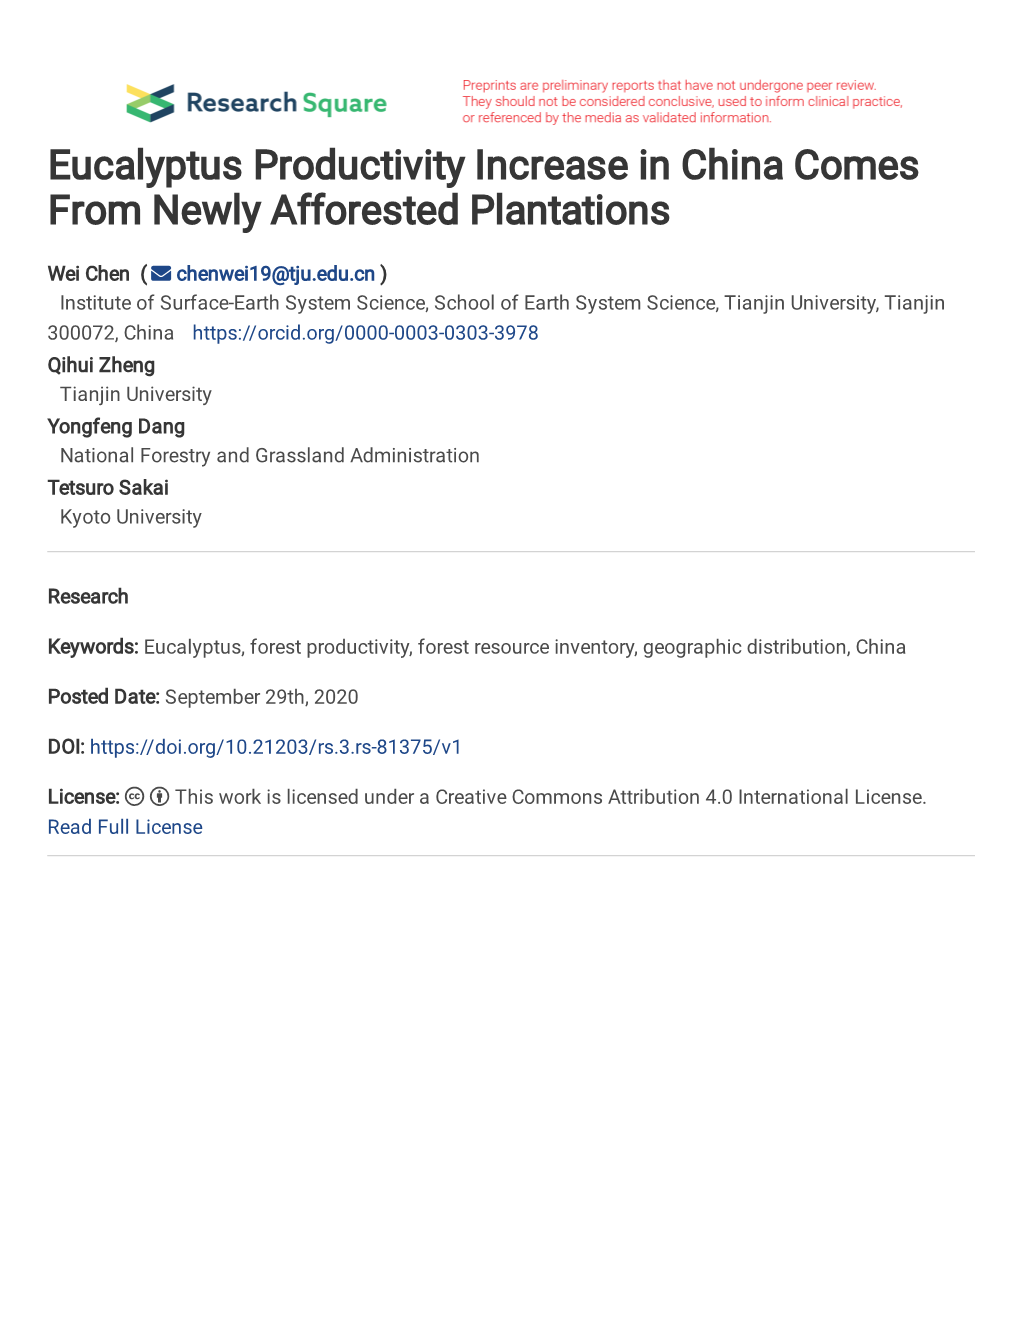 Eucalyptus Productivity Increase in China Comes from Newly Afforested Plantations